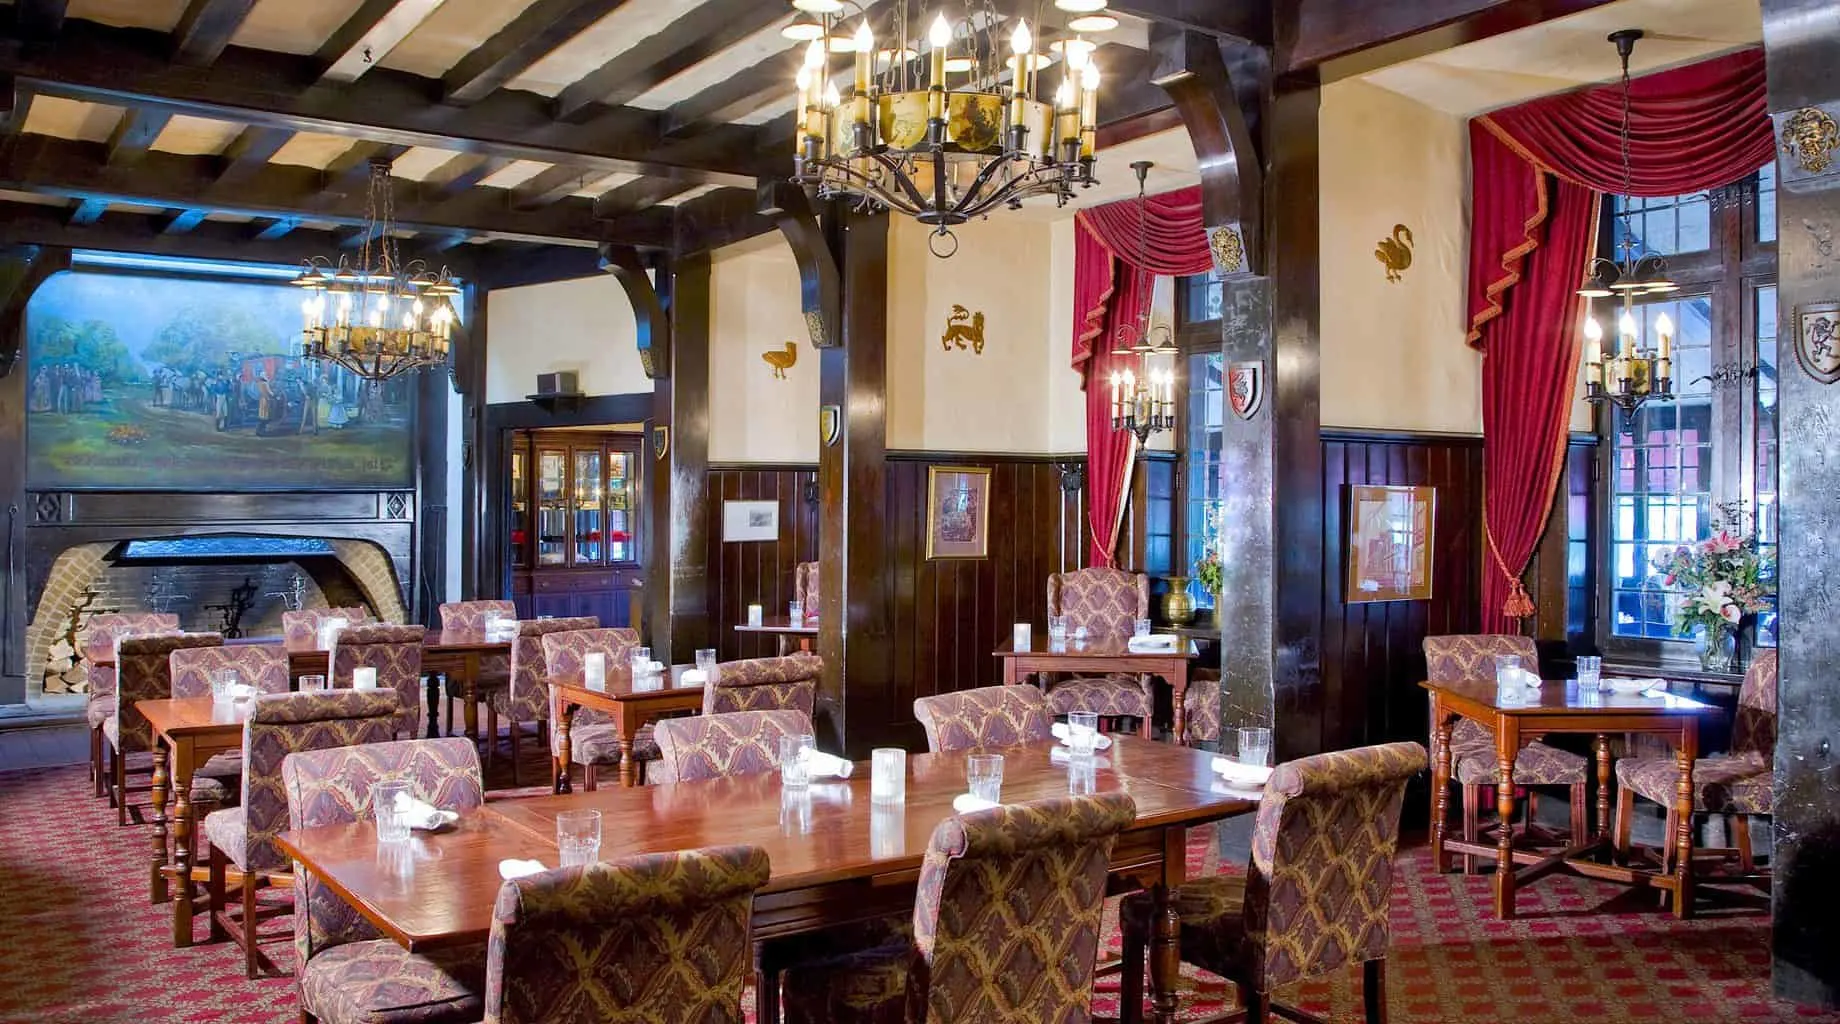 The refined and stately beamed ceilings, vibrant red curtains, upholstered chairs, and wood tables of the restuarant at the Red Coach Inn. 